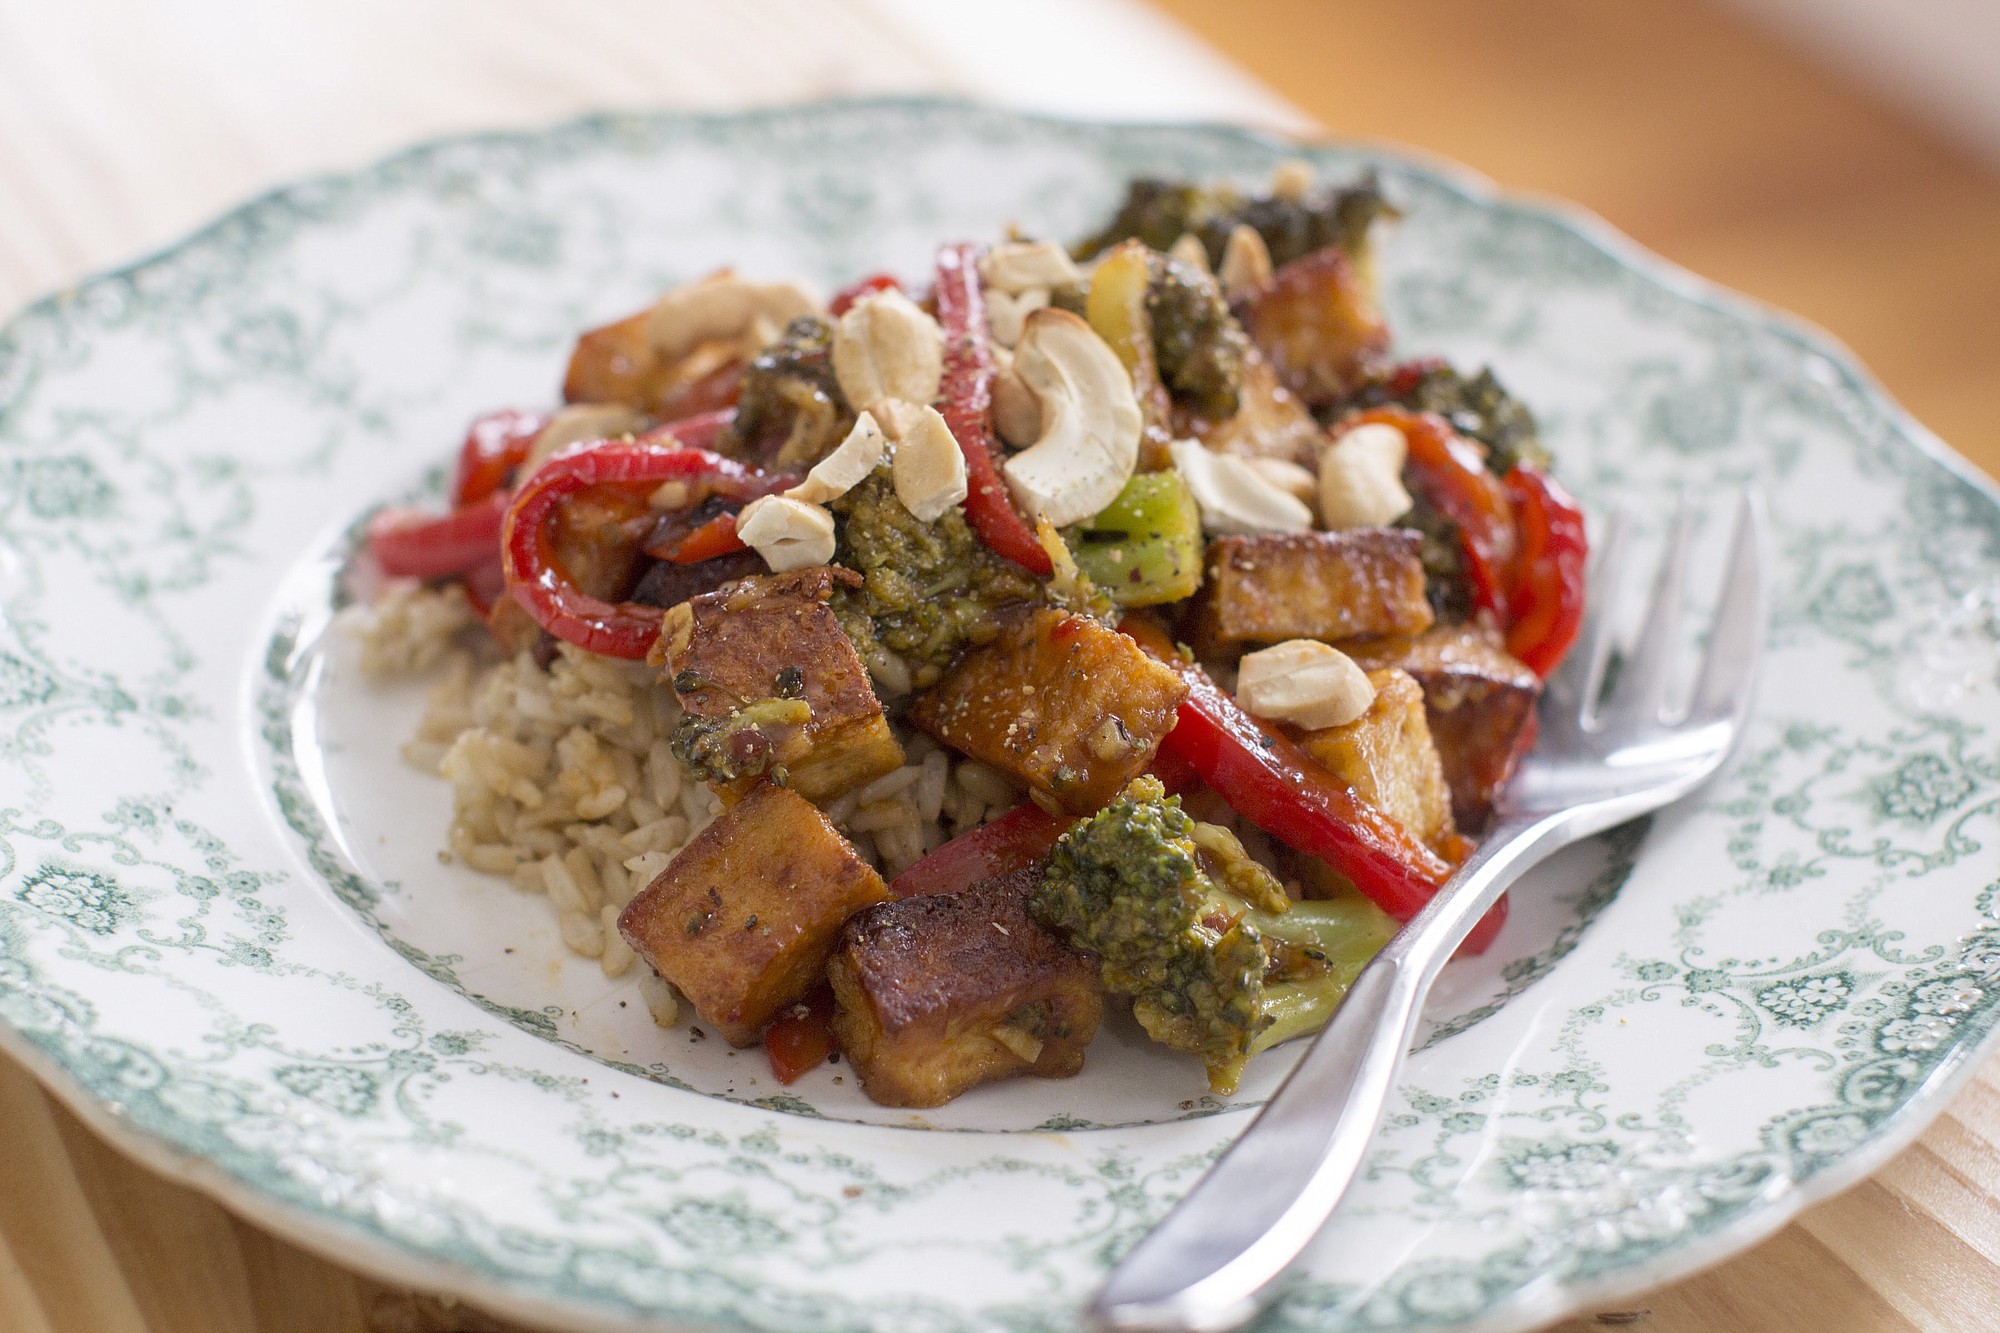 Sauteed tofu with broccoli and red peppers in chili-orange sauce